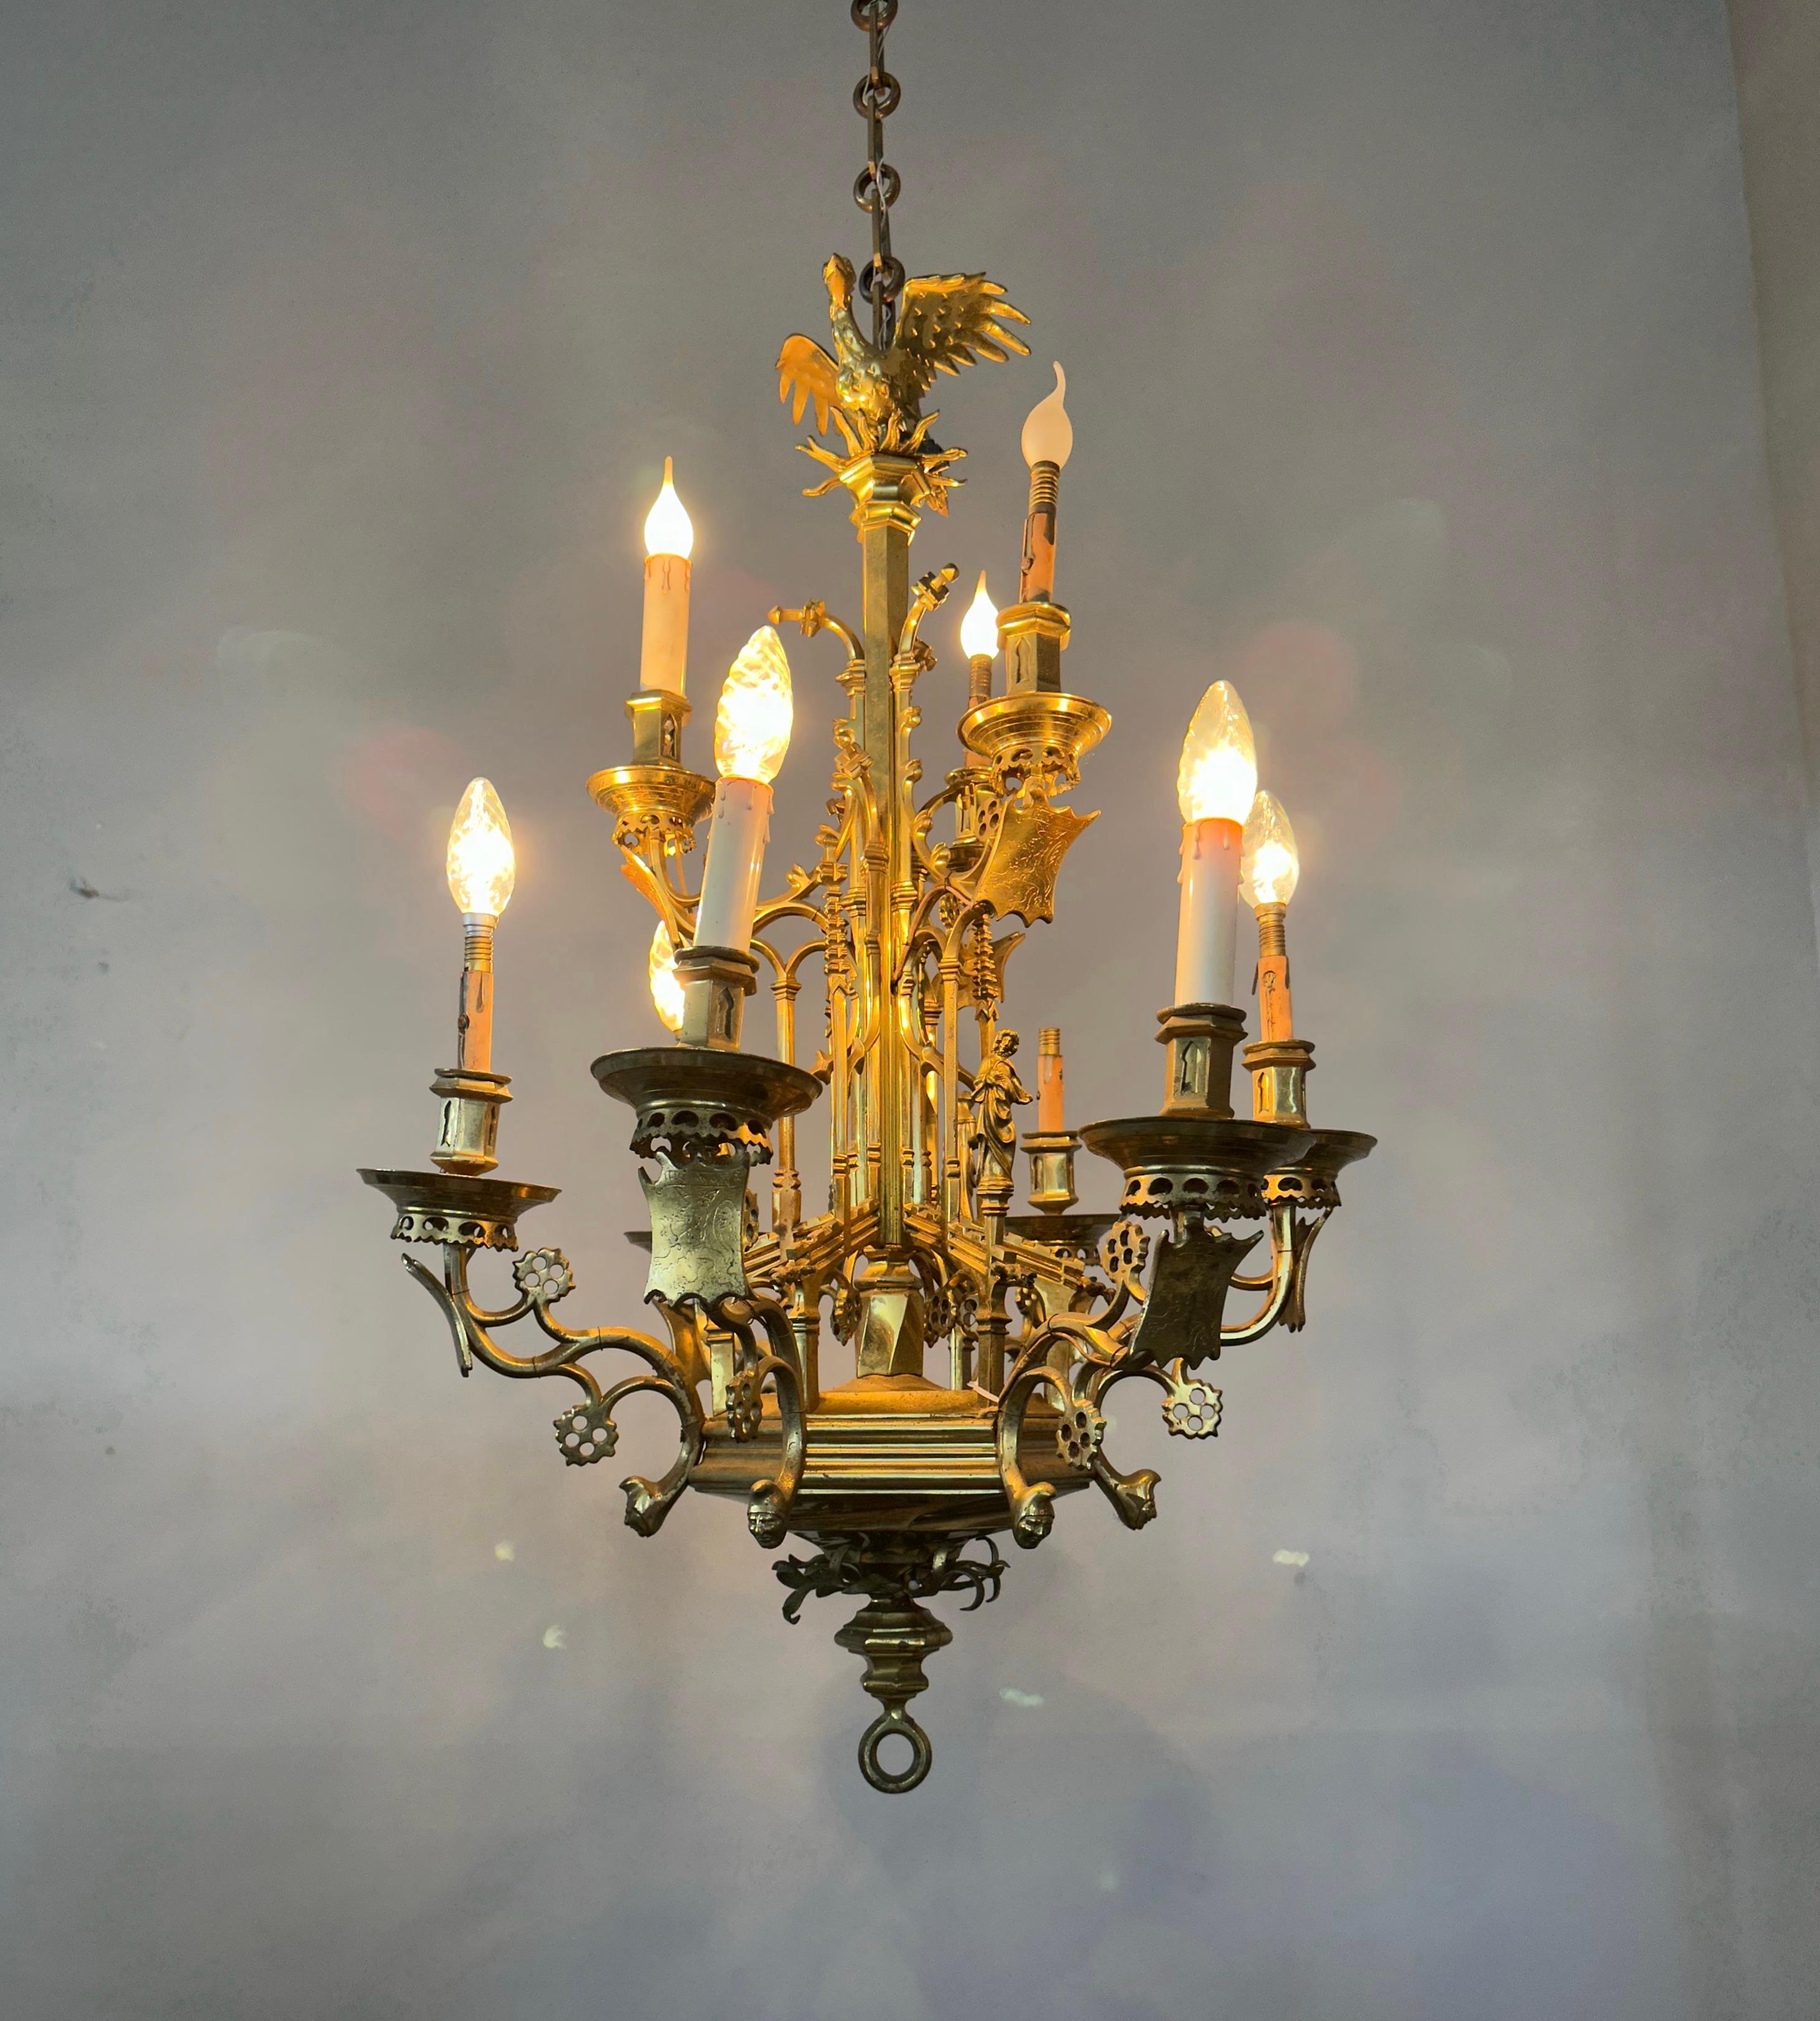 Awesome Antique Bronze Gothic Art Nine Light Chandelier with Phoenix Sculpture For Sale 1